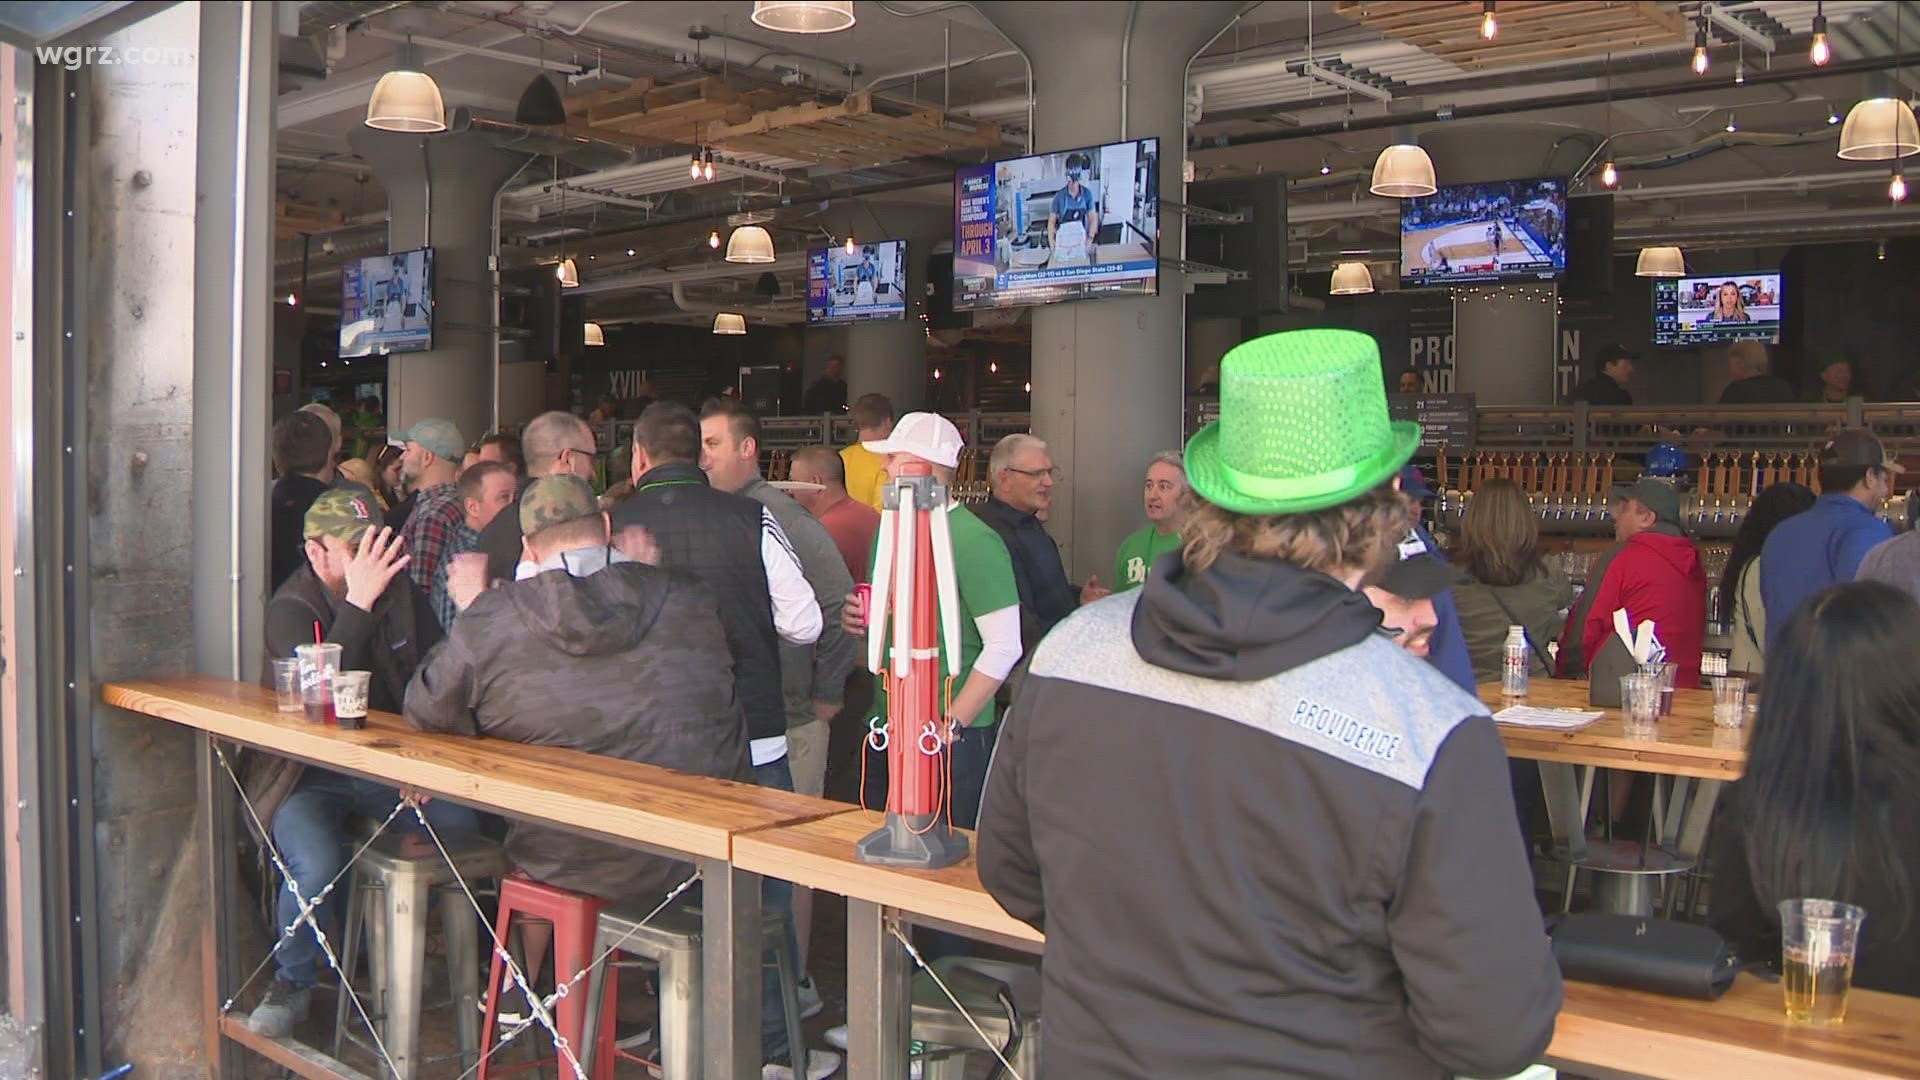 Big day here in Buffalo. March Madness and St. Patrick's Day celebrations are in full swing. This is the busiest day in Buffalo since the pandemic two years ago.